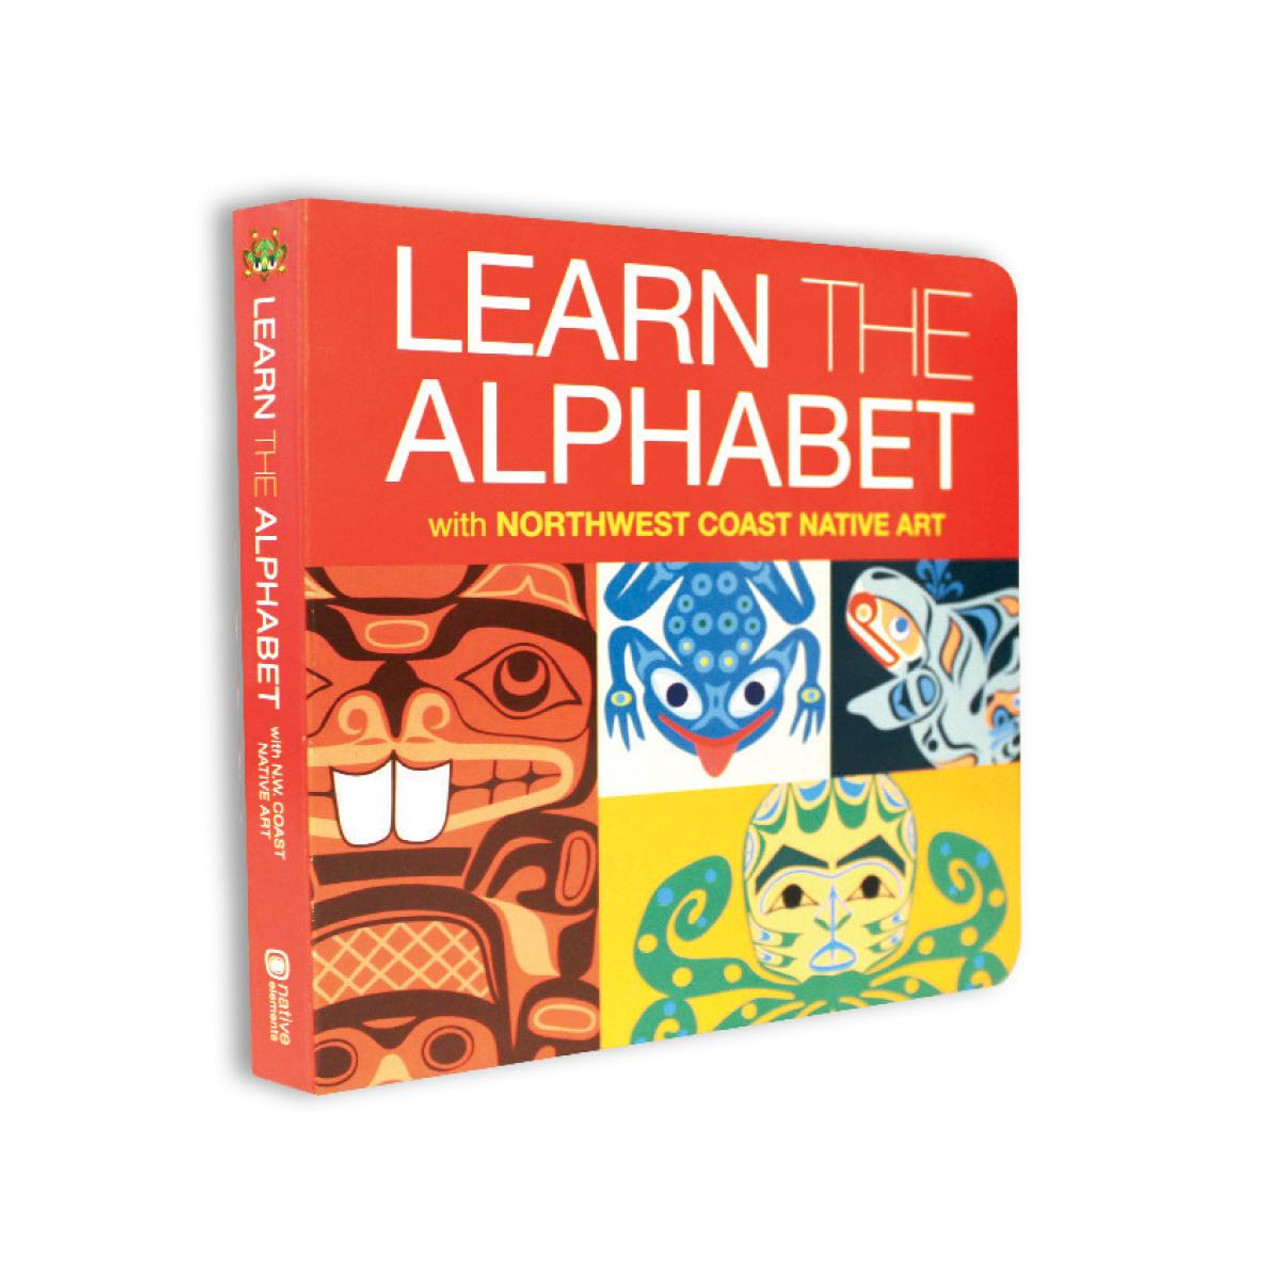 the　Various　Board　Book　Northwest　Learn　Alphabet,　Artists　Native